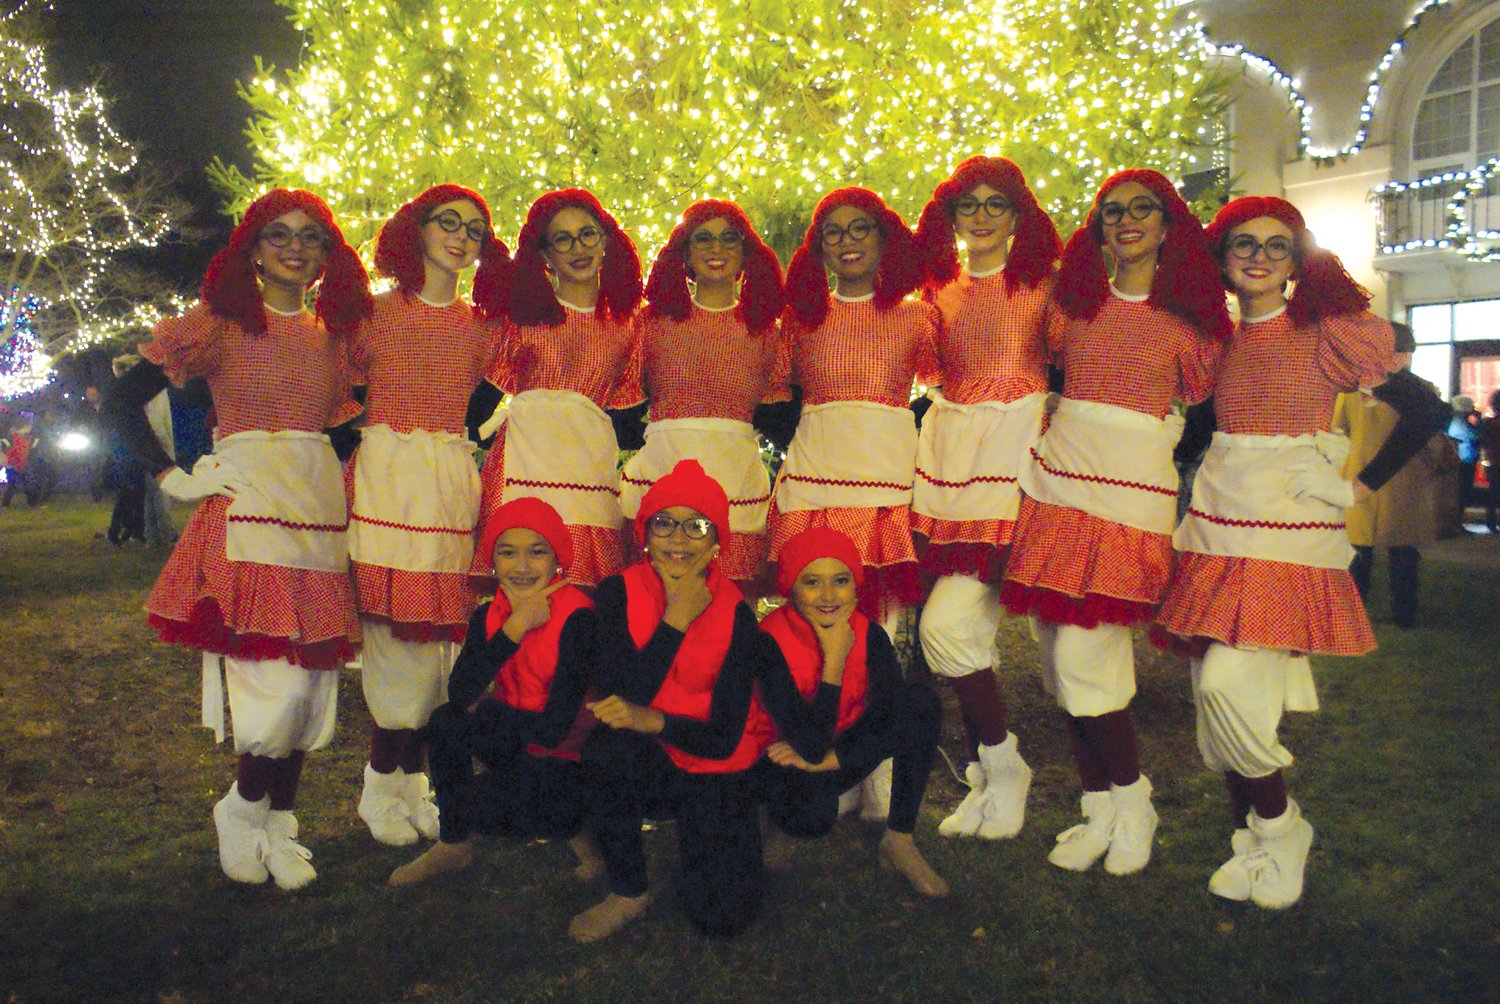 RAGDOLLS: A group from the Carolyn Dutra Dance Studio performed the infamous Rockets
Christmas Show at Radio City Music Hall.